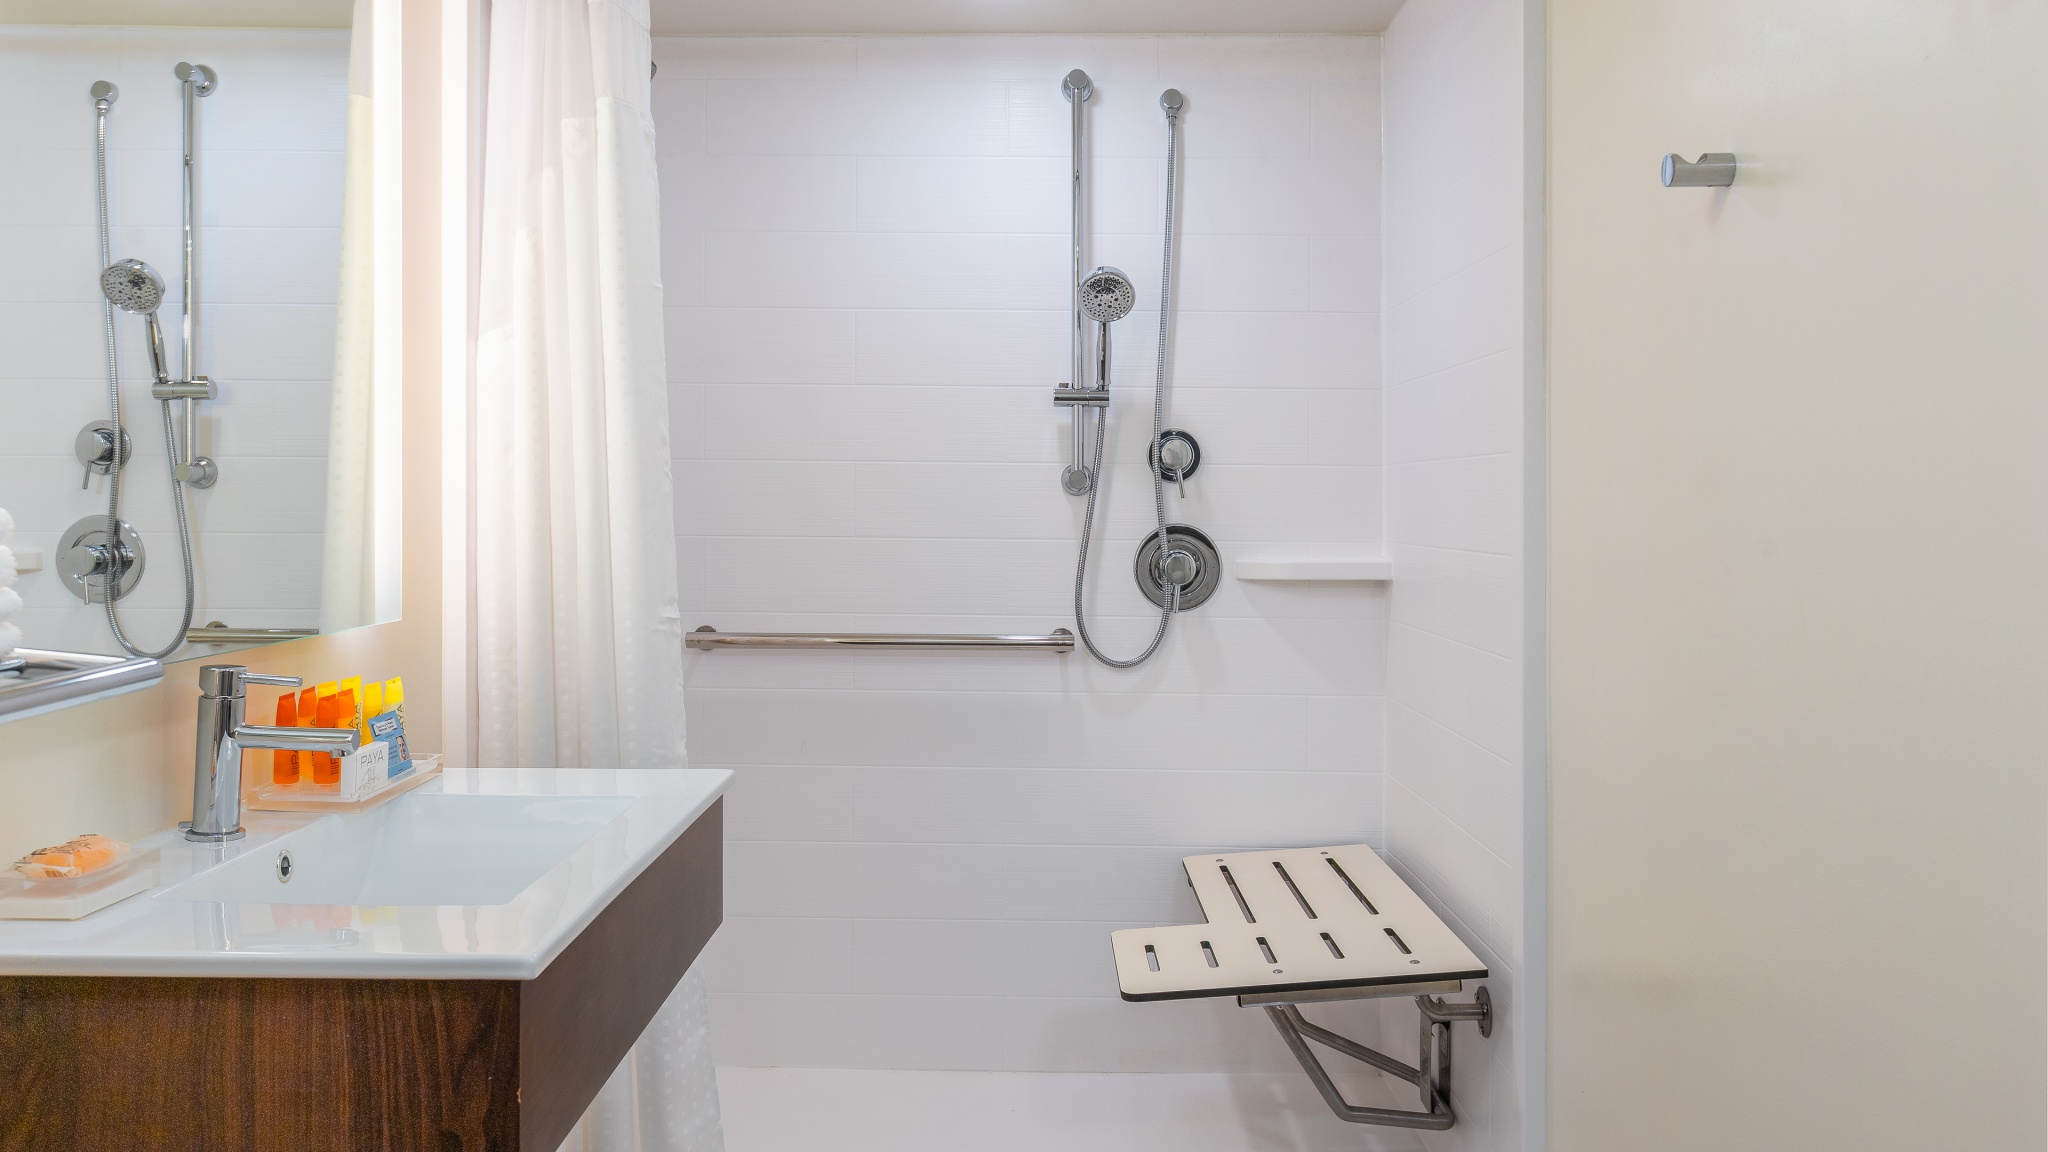 Accessible shower with grab bars, seat, handheld shower and lowered sink with lighted vanity